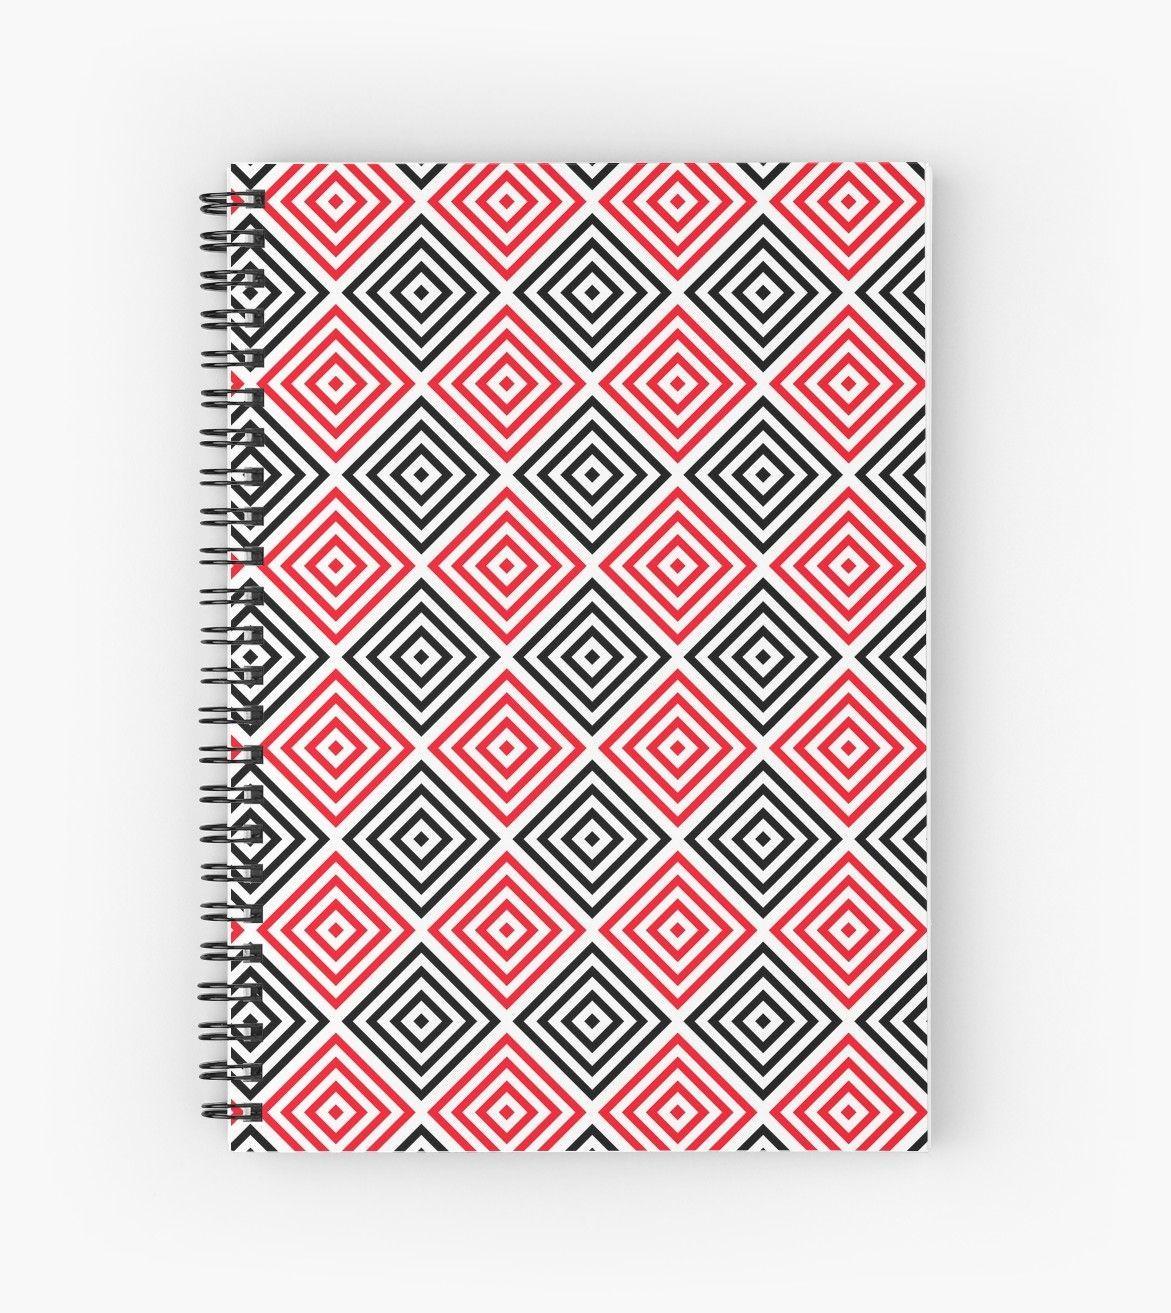 Red Black and White Diamond Rectangle Logo - Black, red and white diamond rhombus pattern' Spiral Notebook